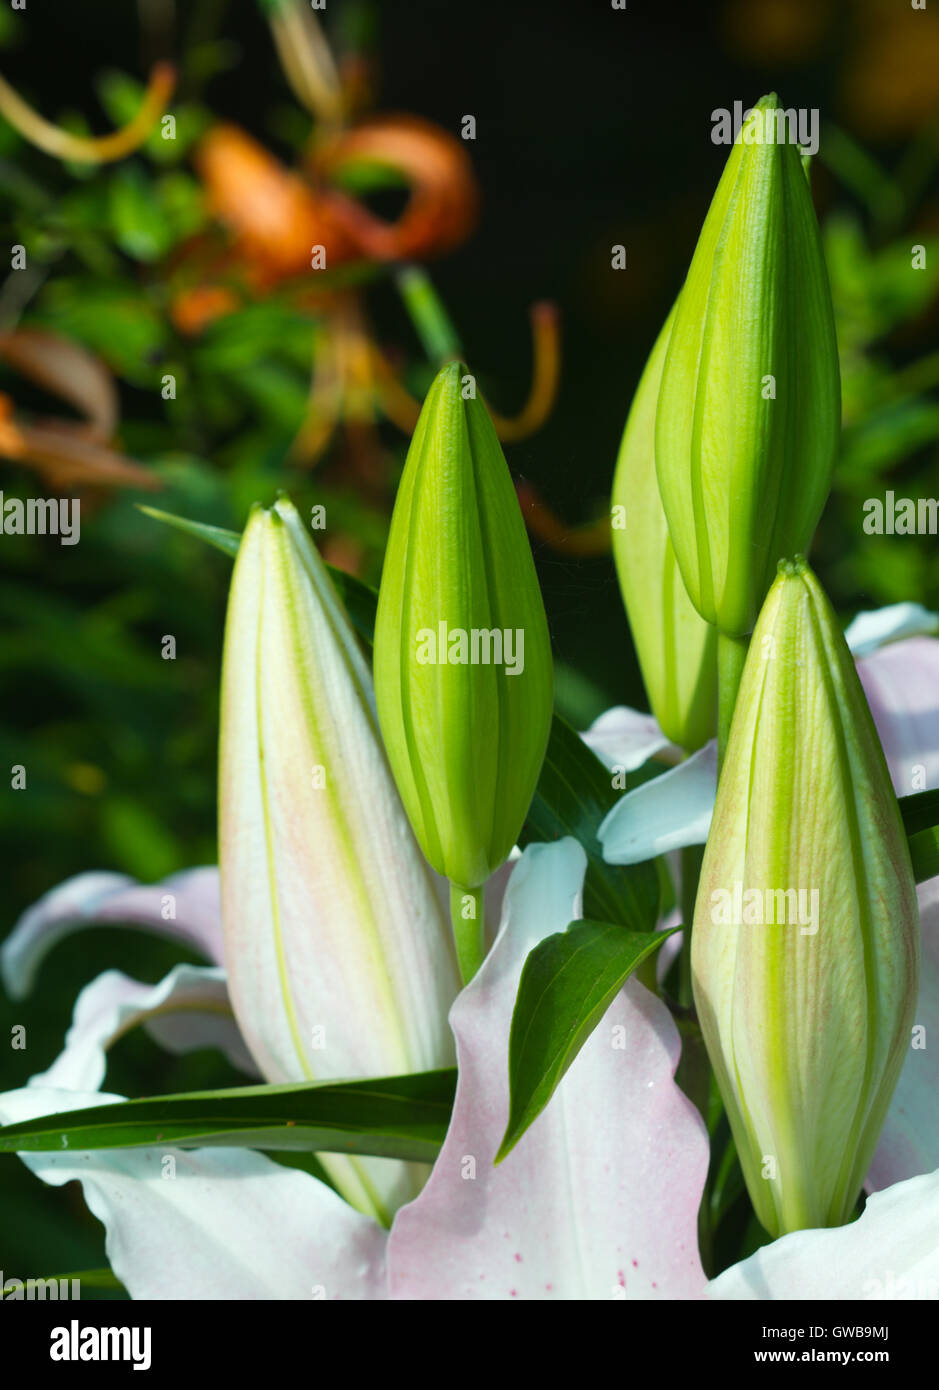 Nature background pattern: petals, pistil, stamens and buds of lily flower closeup Stock Photo